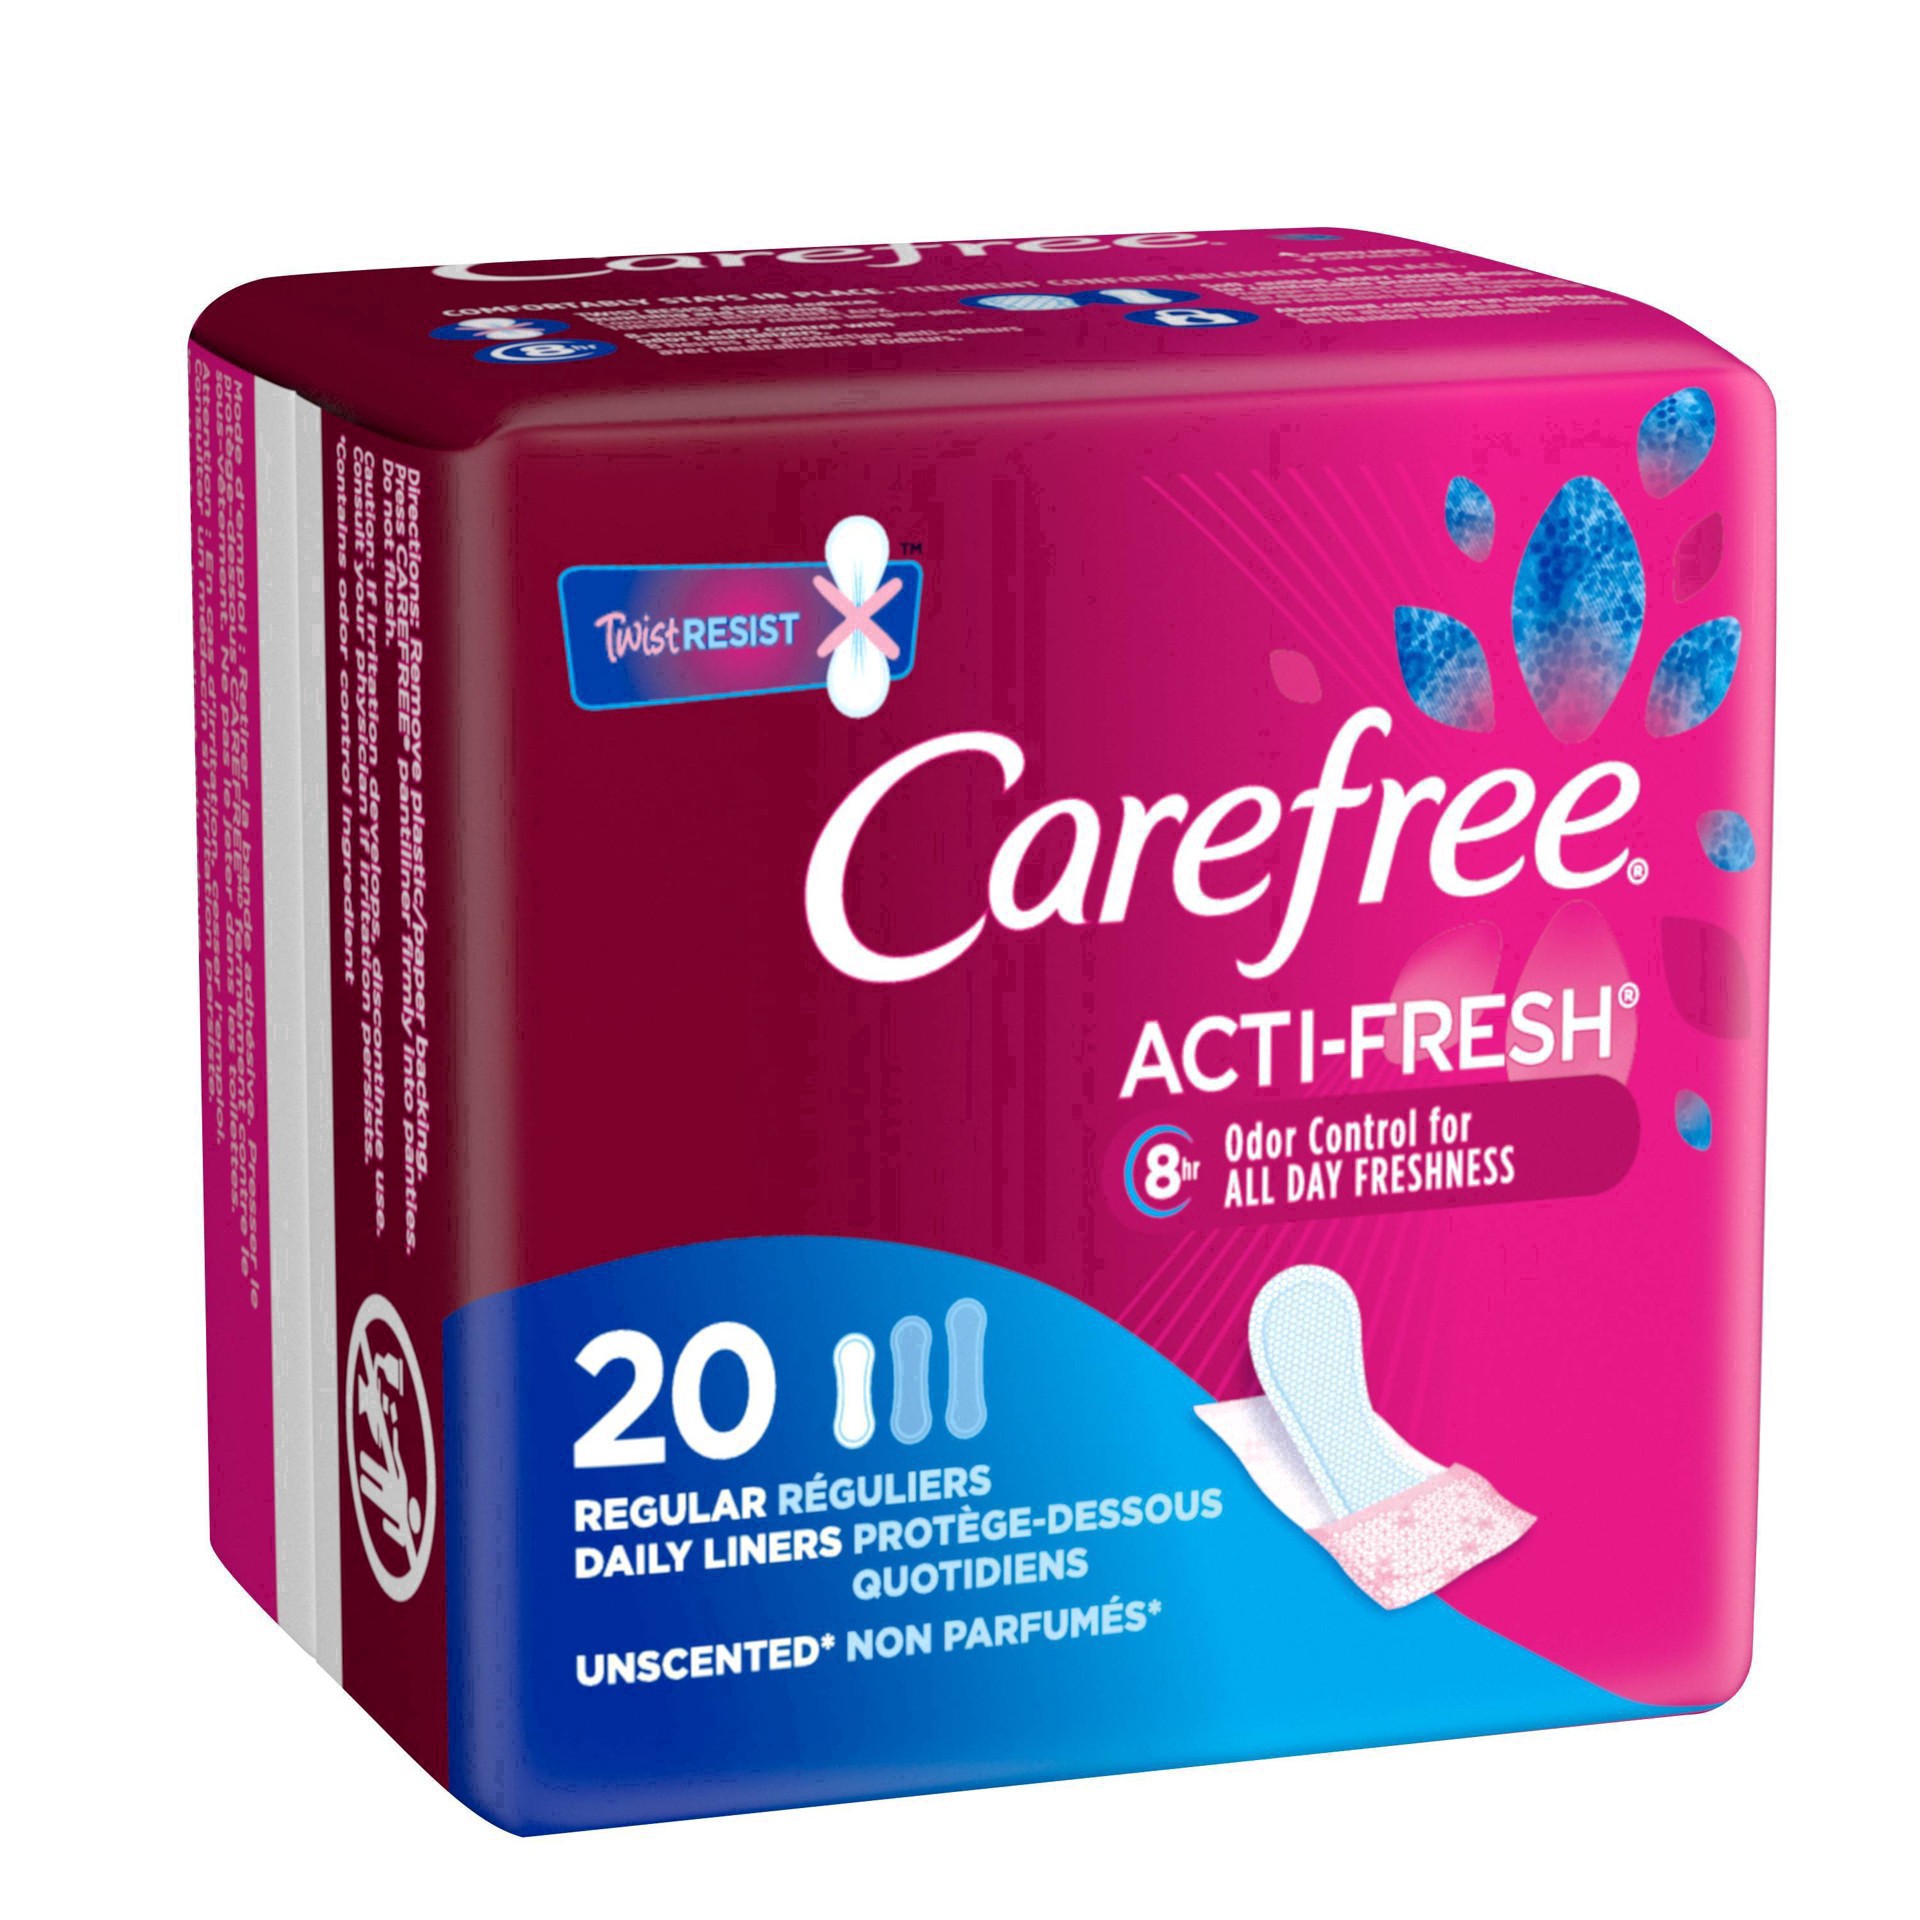 slide 24 of 67, Carefree Panty Liners, Regular Liners, Wrapped Unscented, 20 ct